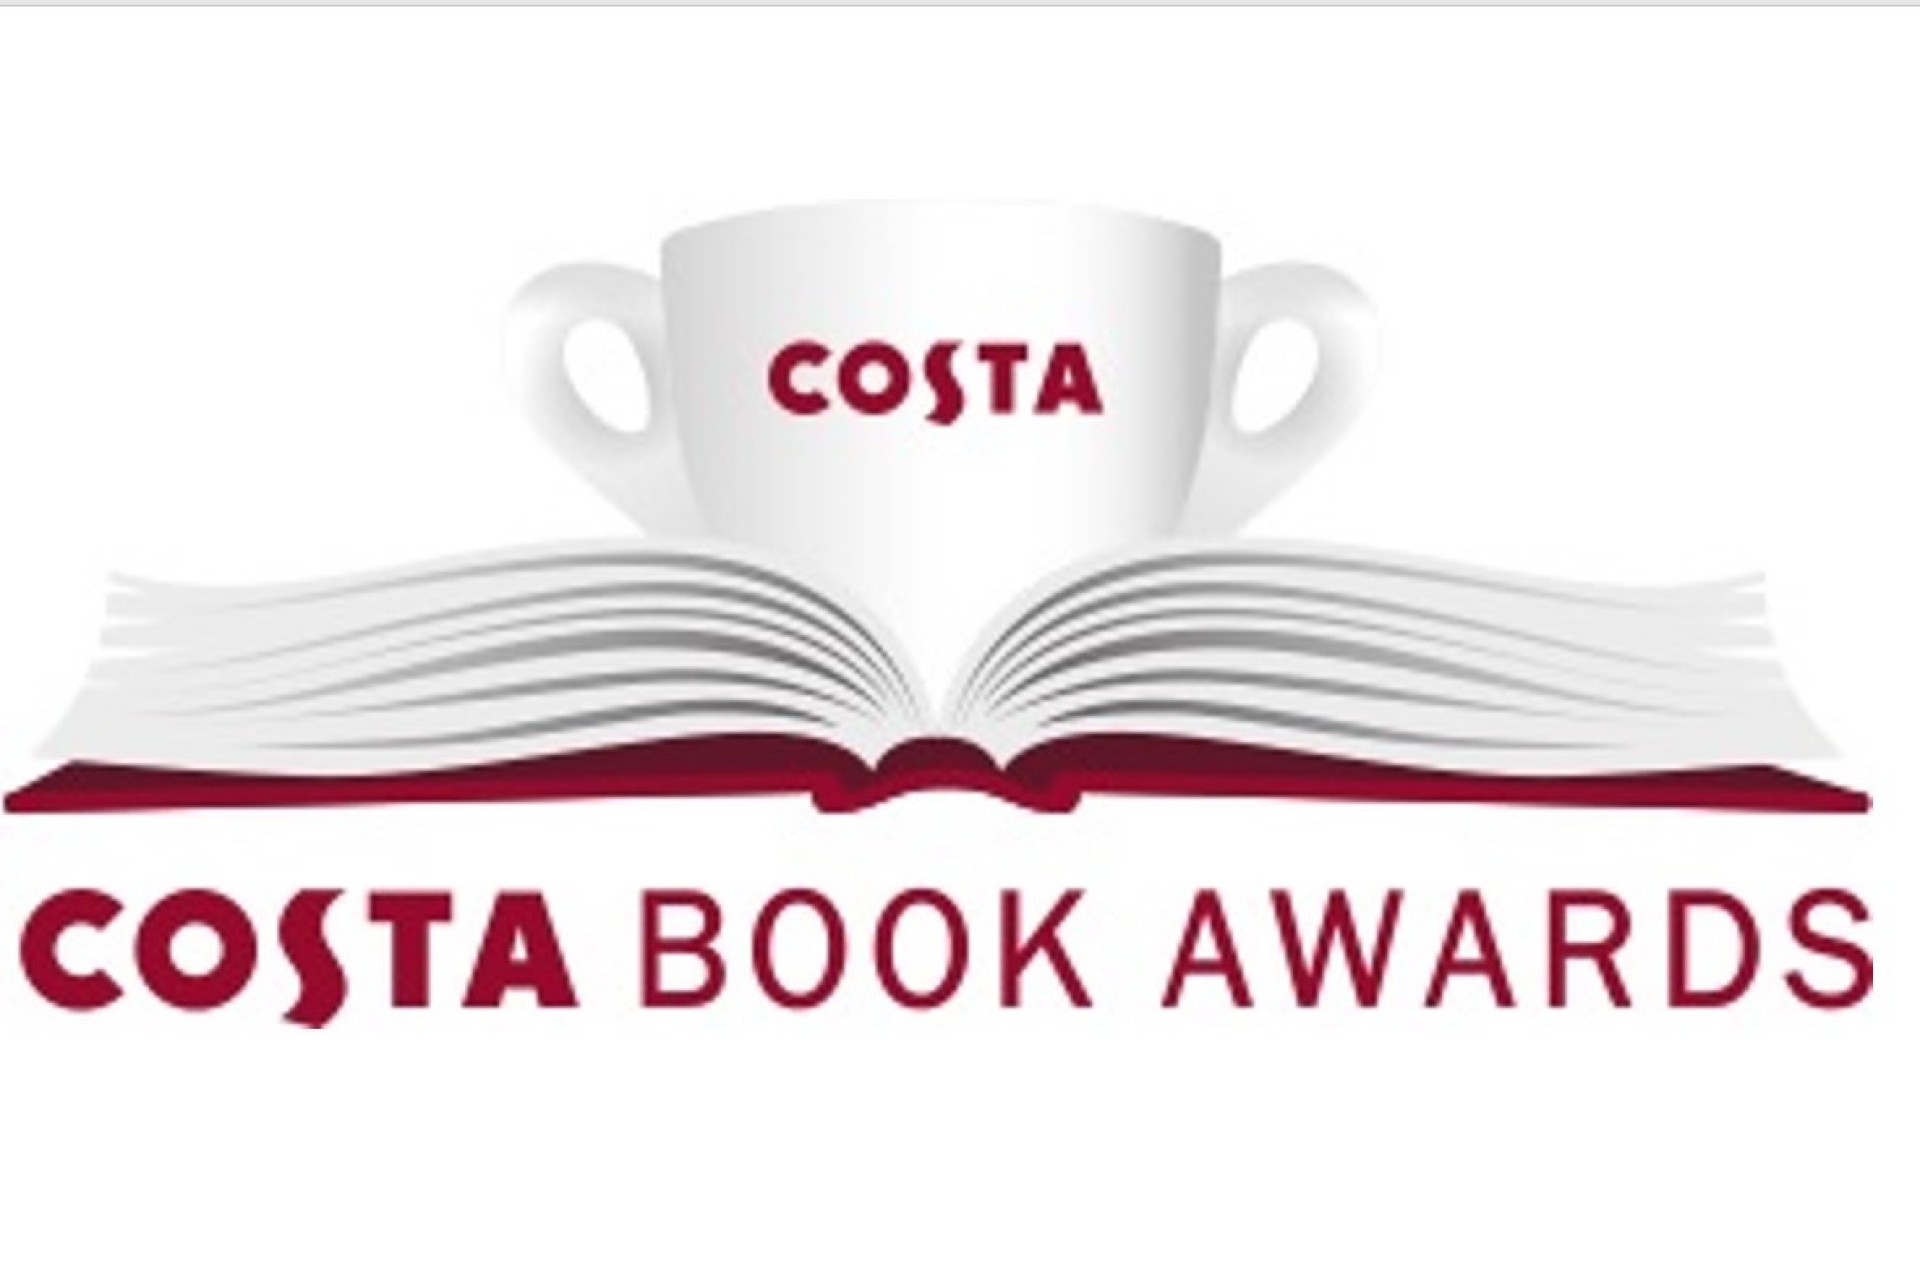 Costa Book Awards discontinued after half a century